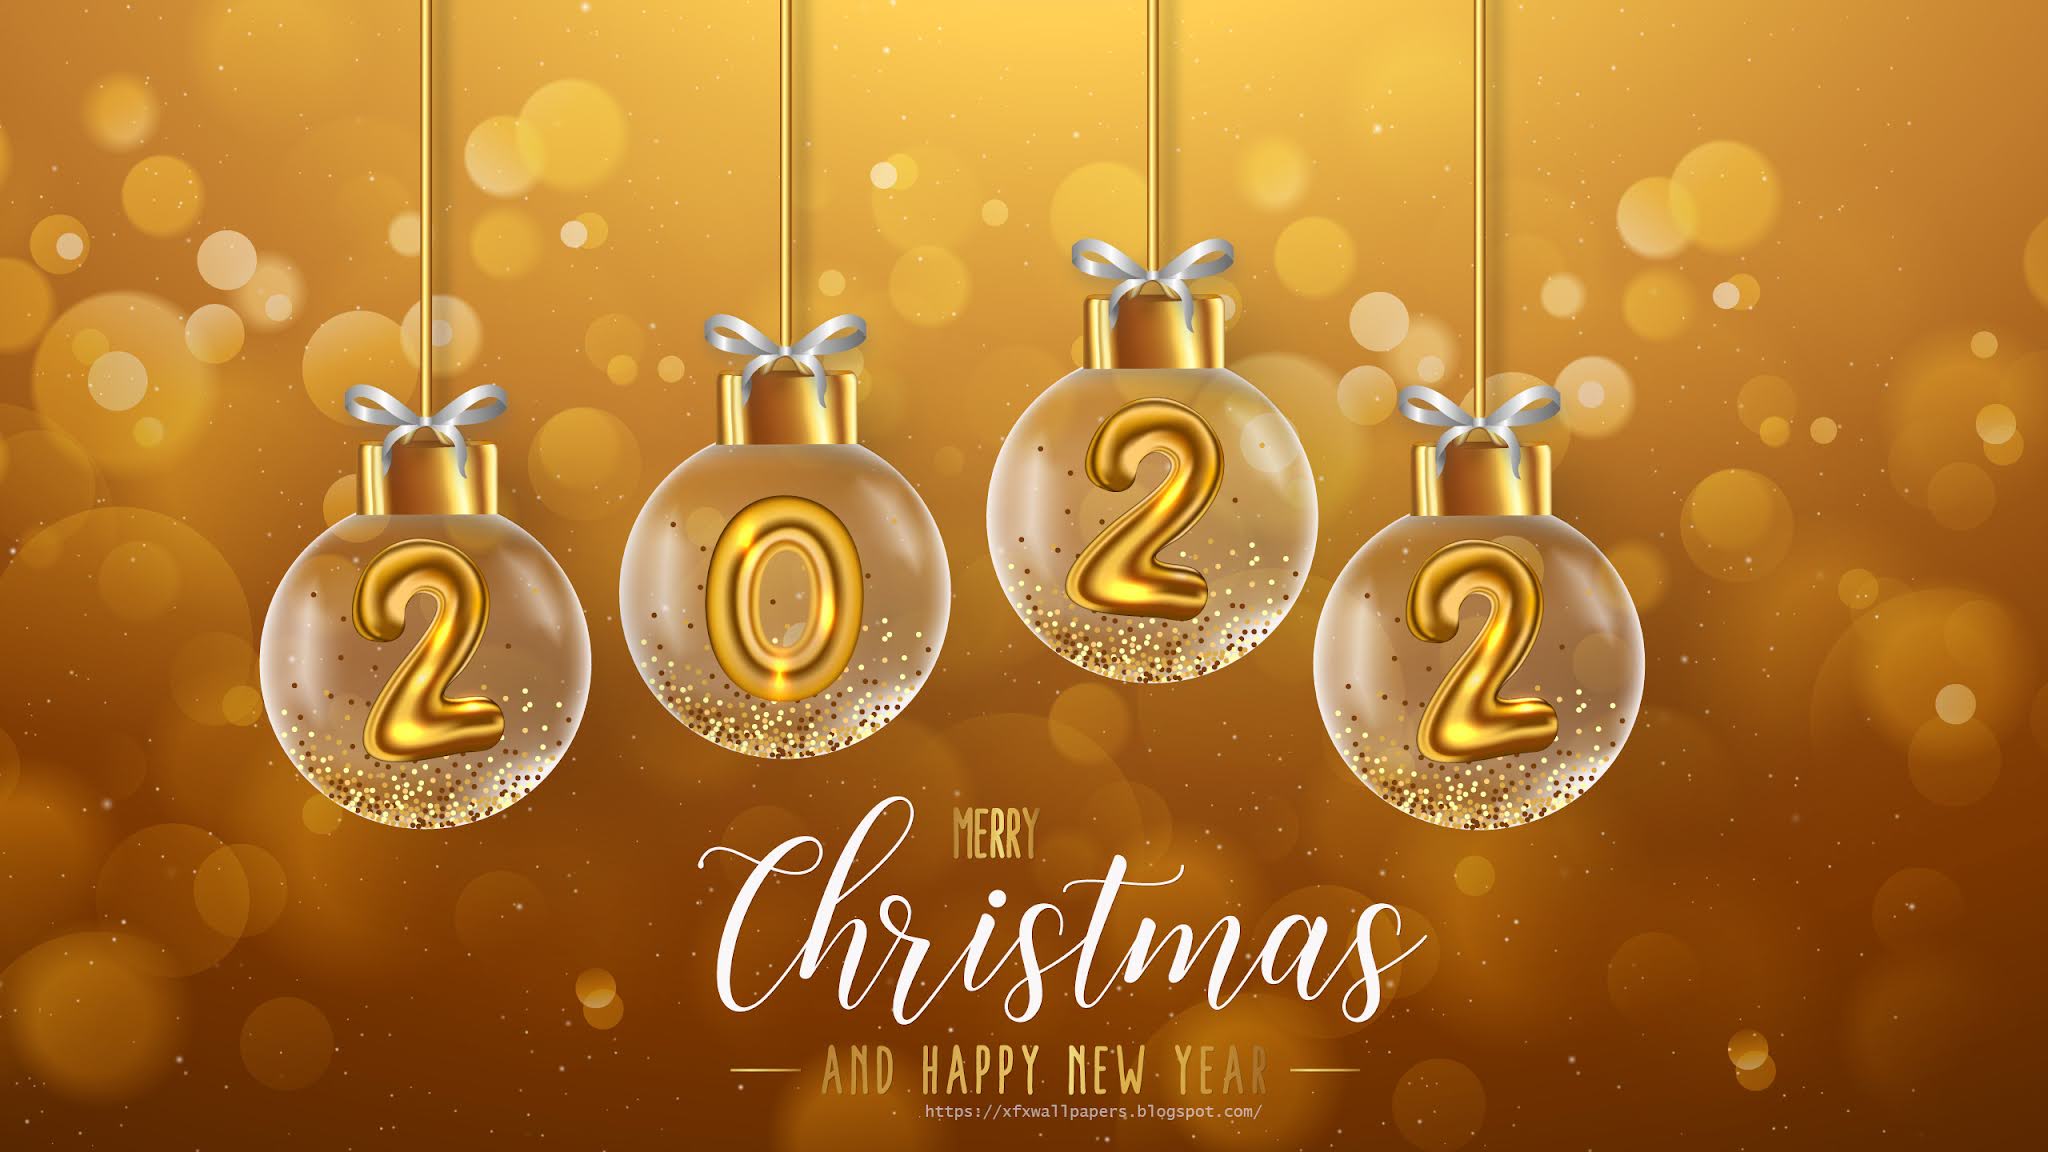 merry christmas and happy new year 2022